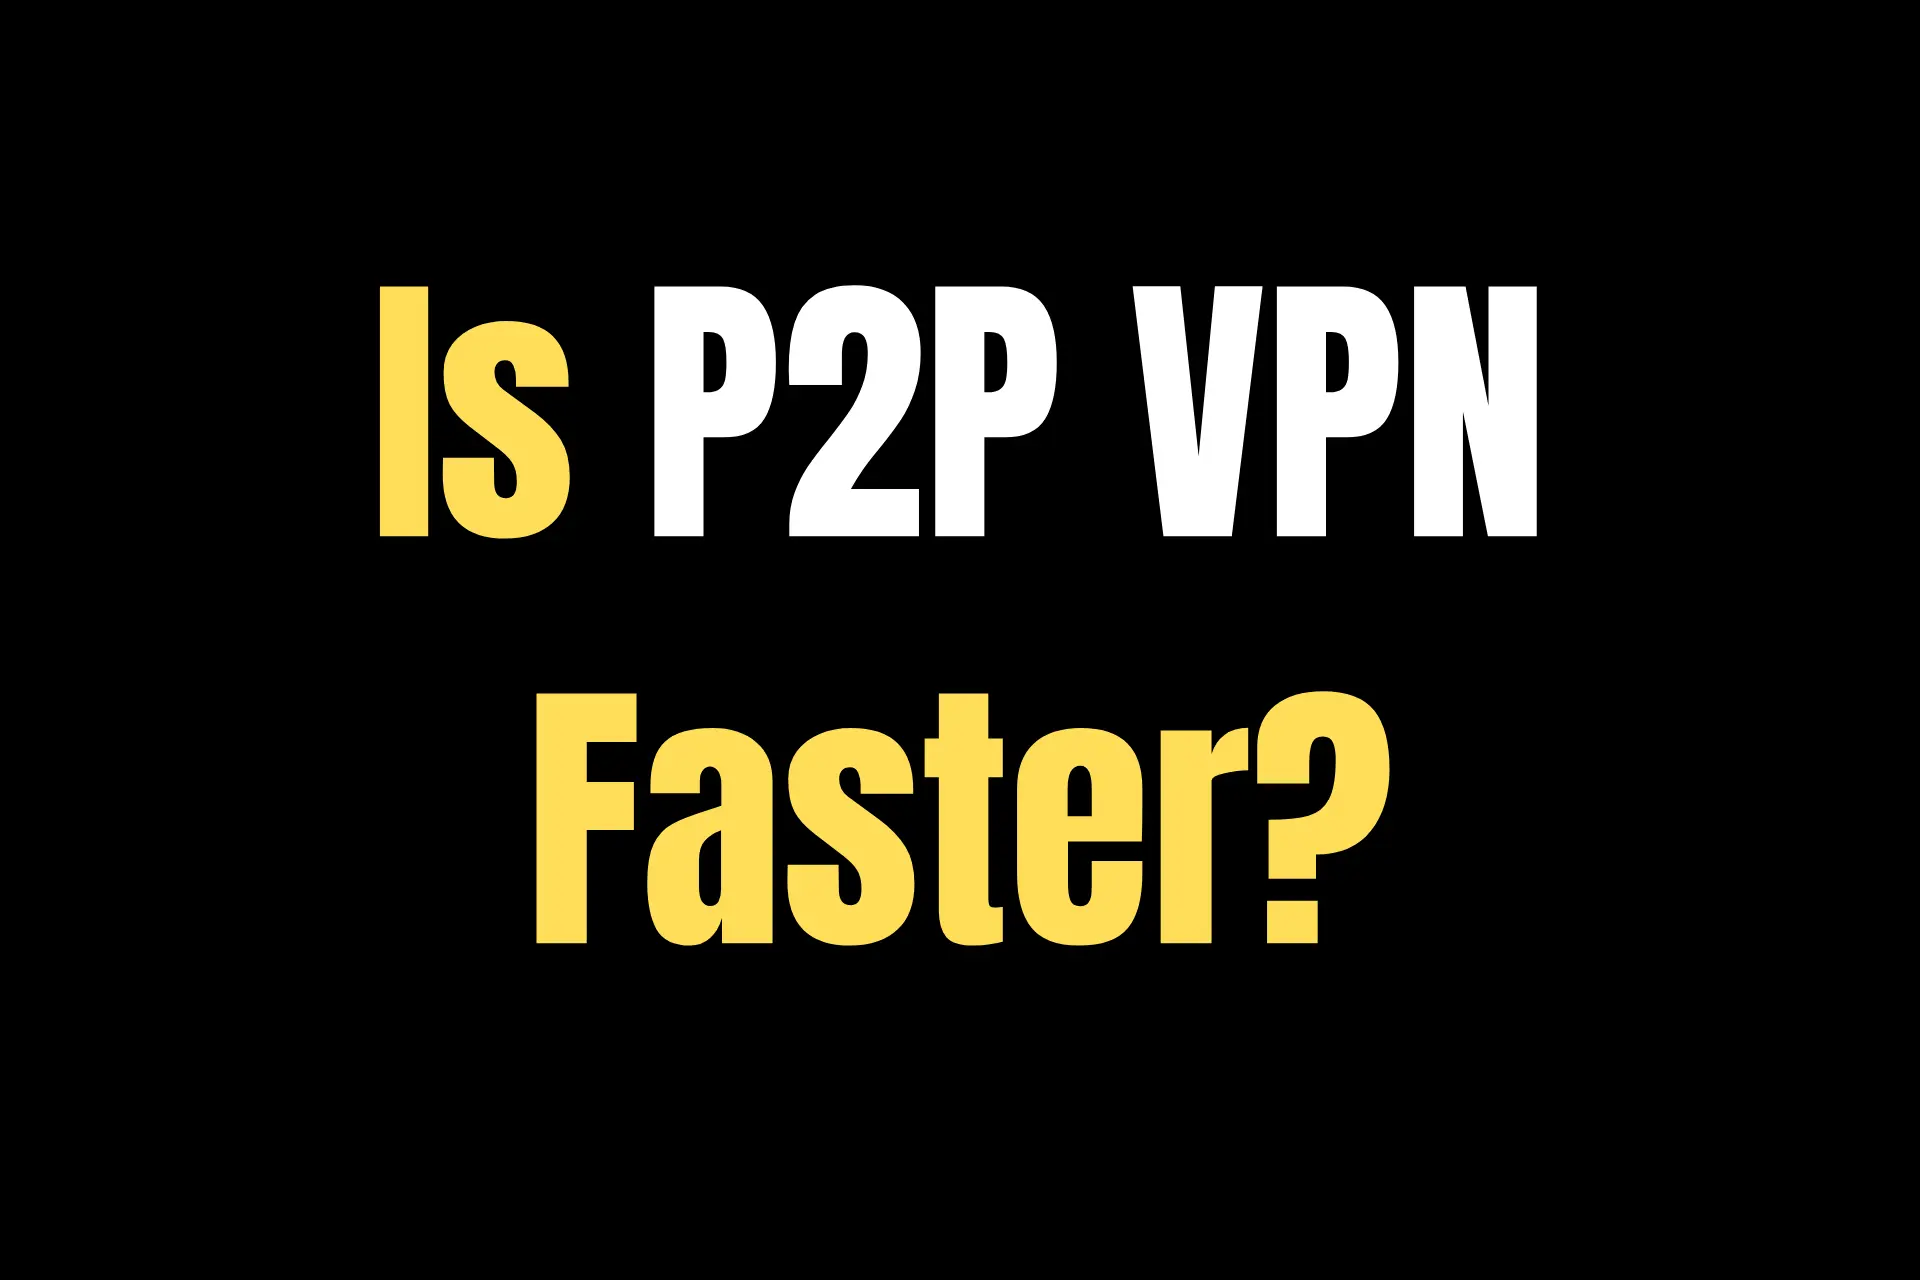 Is P2P VPN faster?